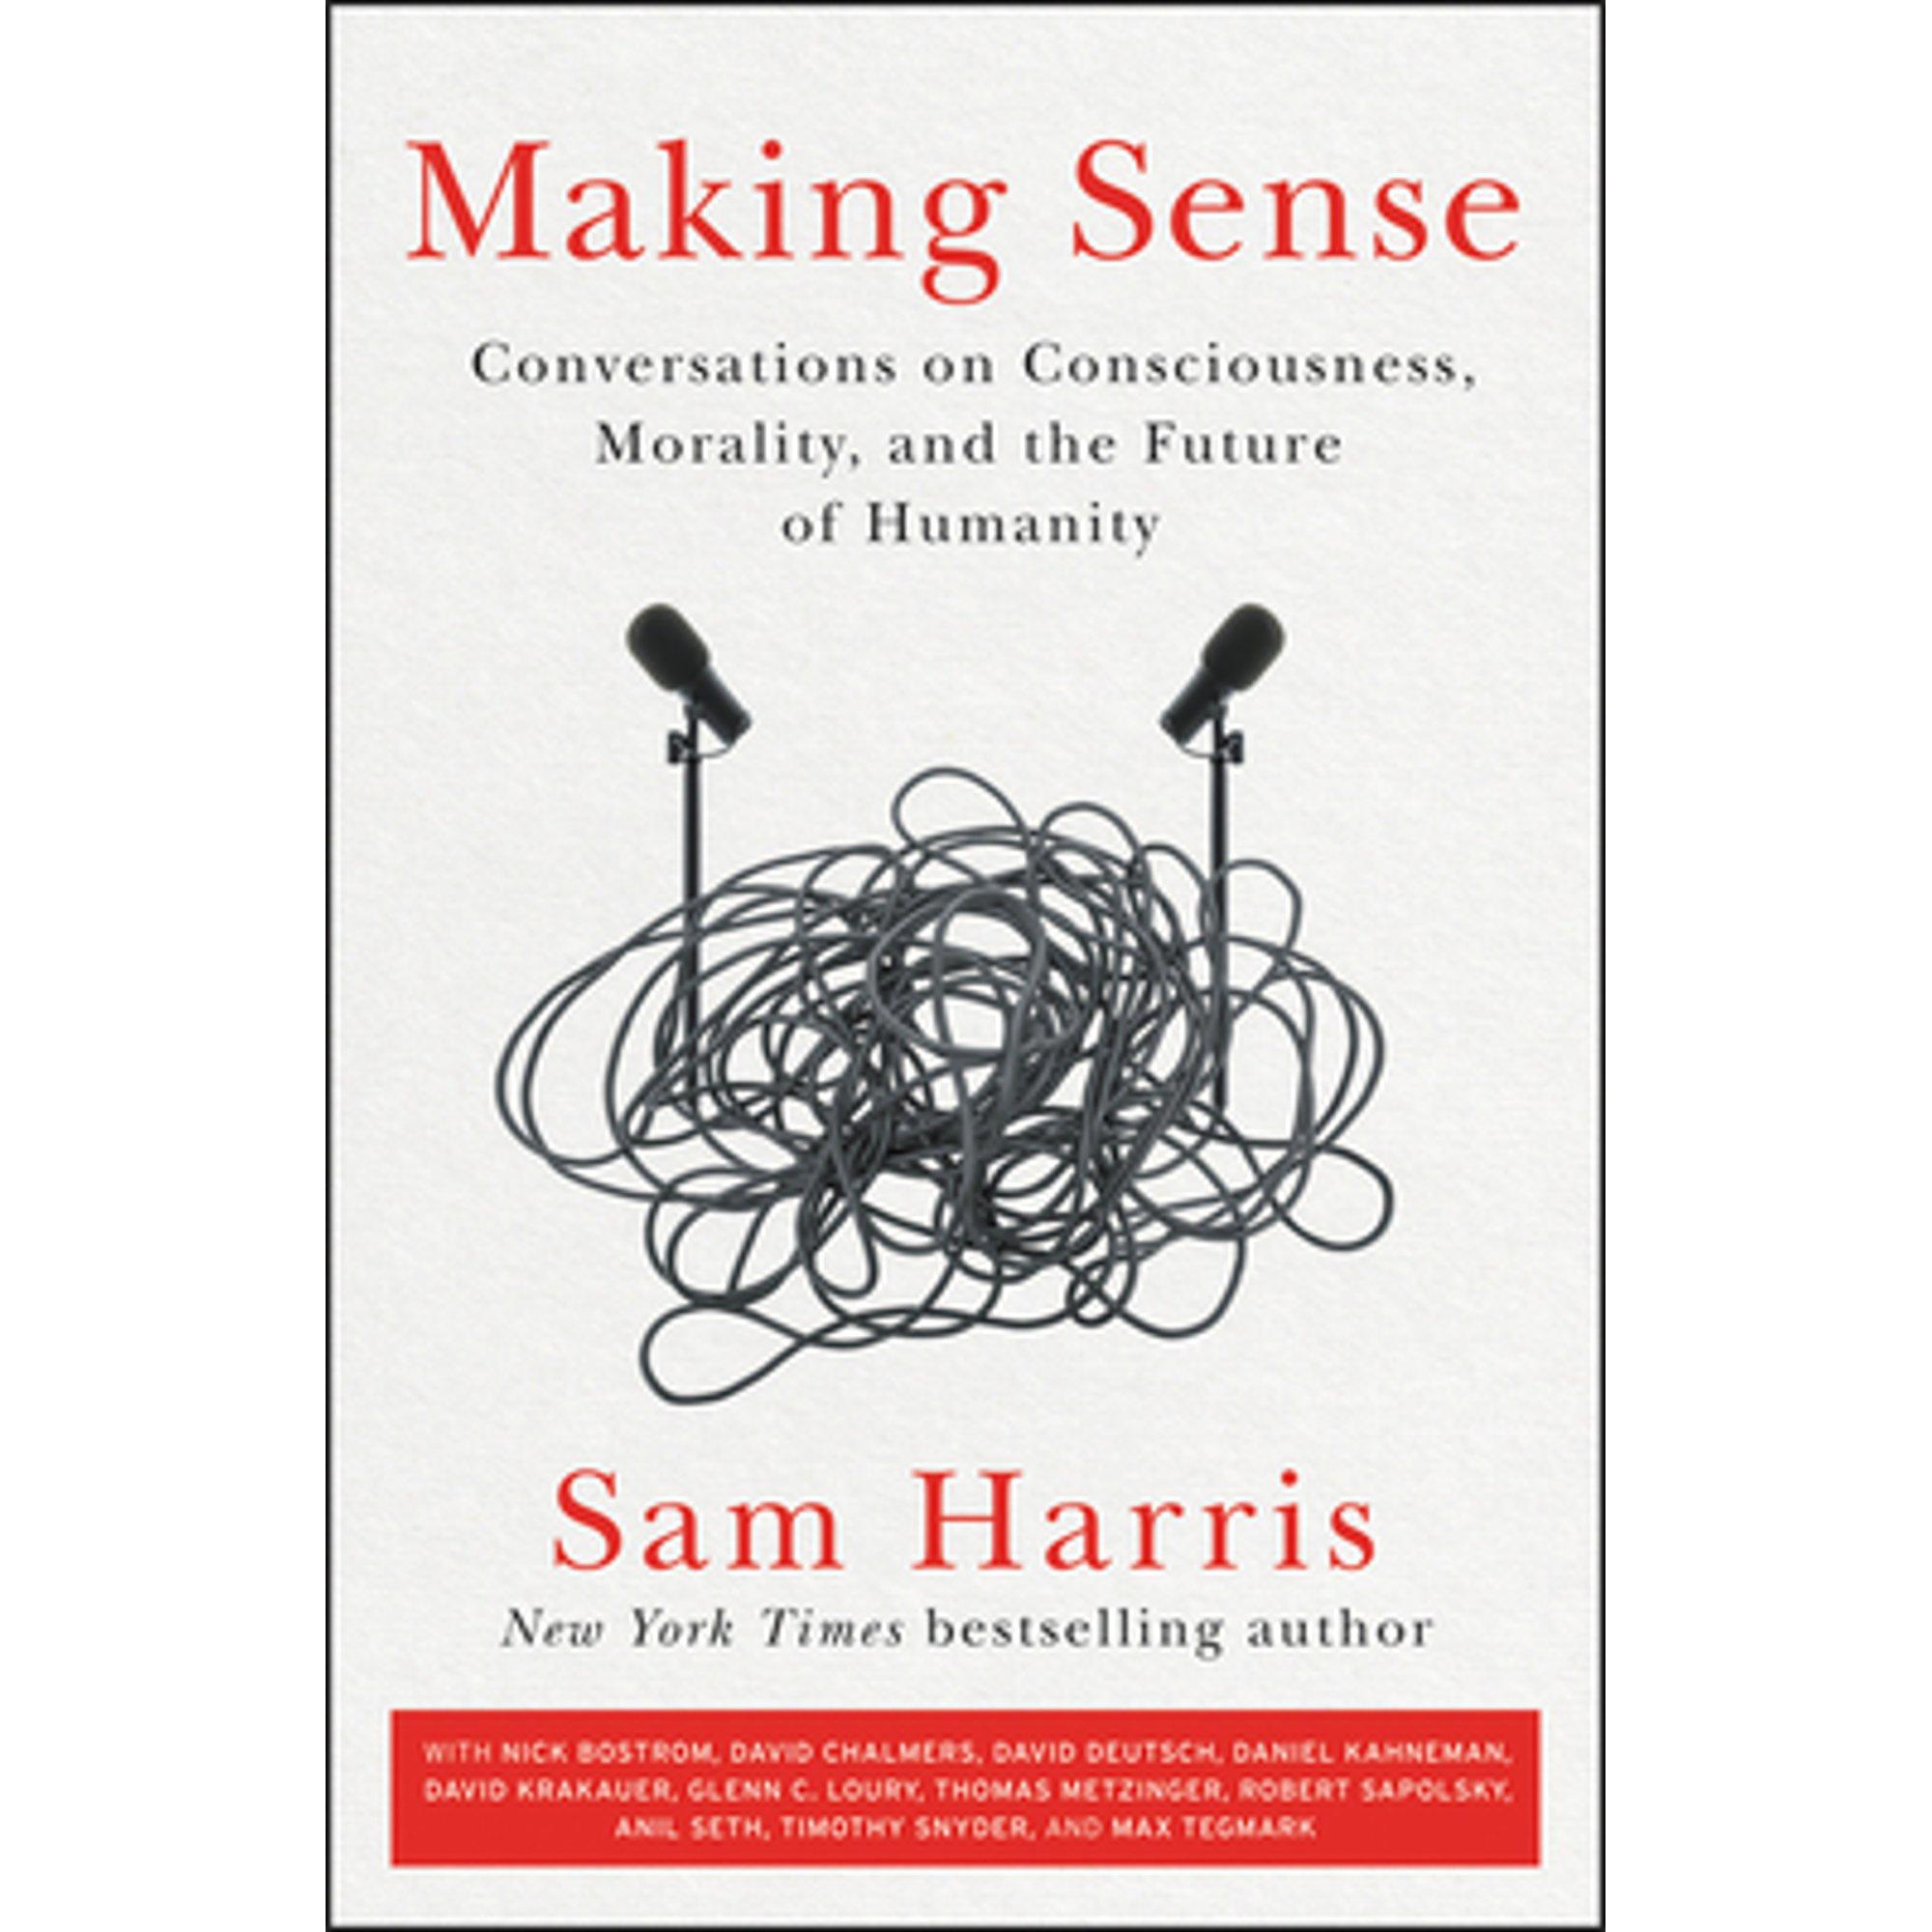 Making Sense Conversations on Consciousness Morality and the Future eBook for $1.99